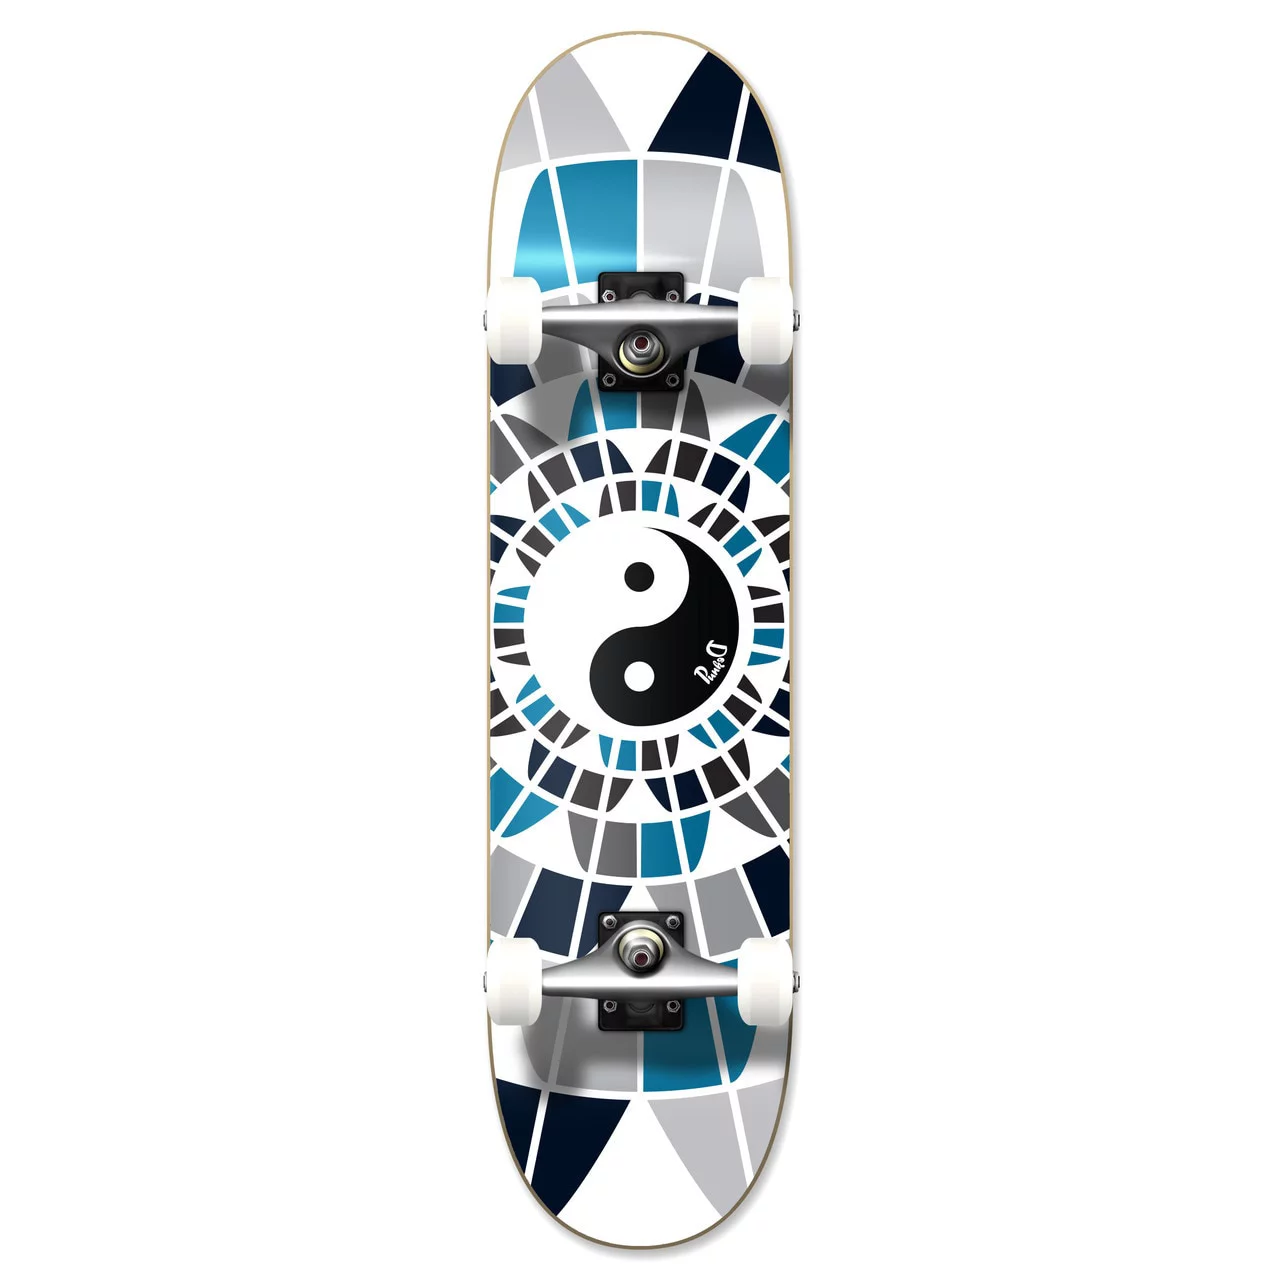 Yocaher Graphic Complete 31" x 7.75" Skateboard - Yin Yang